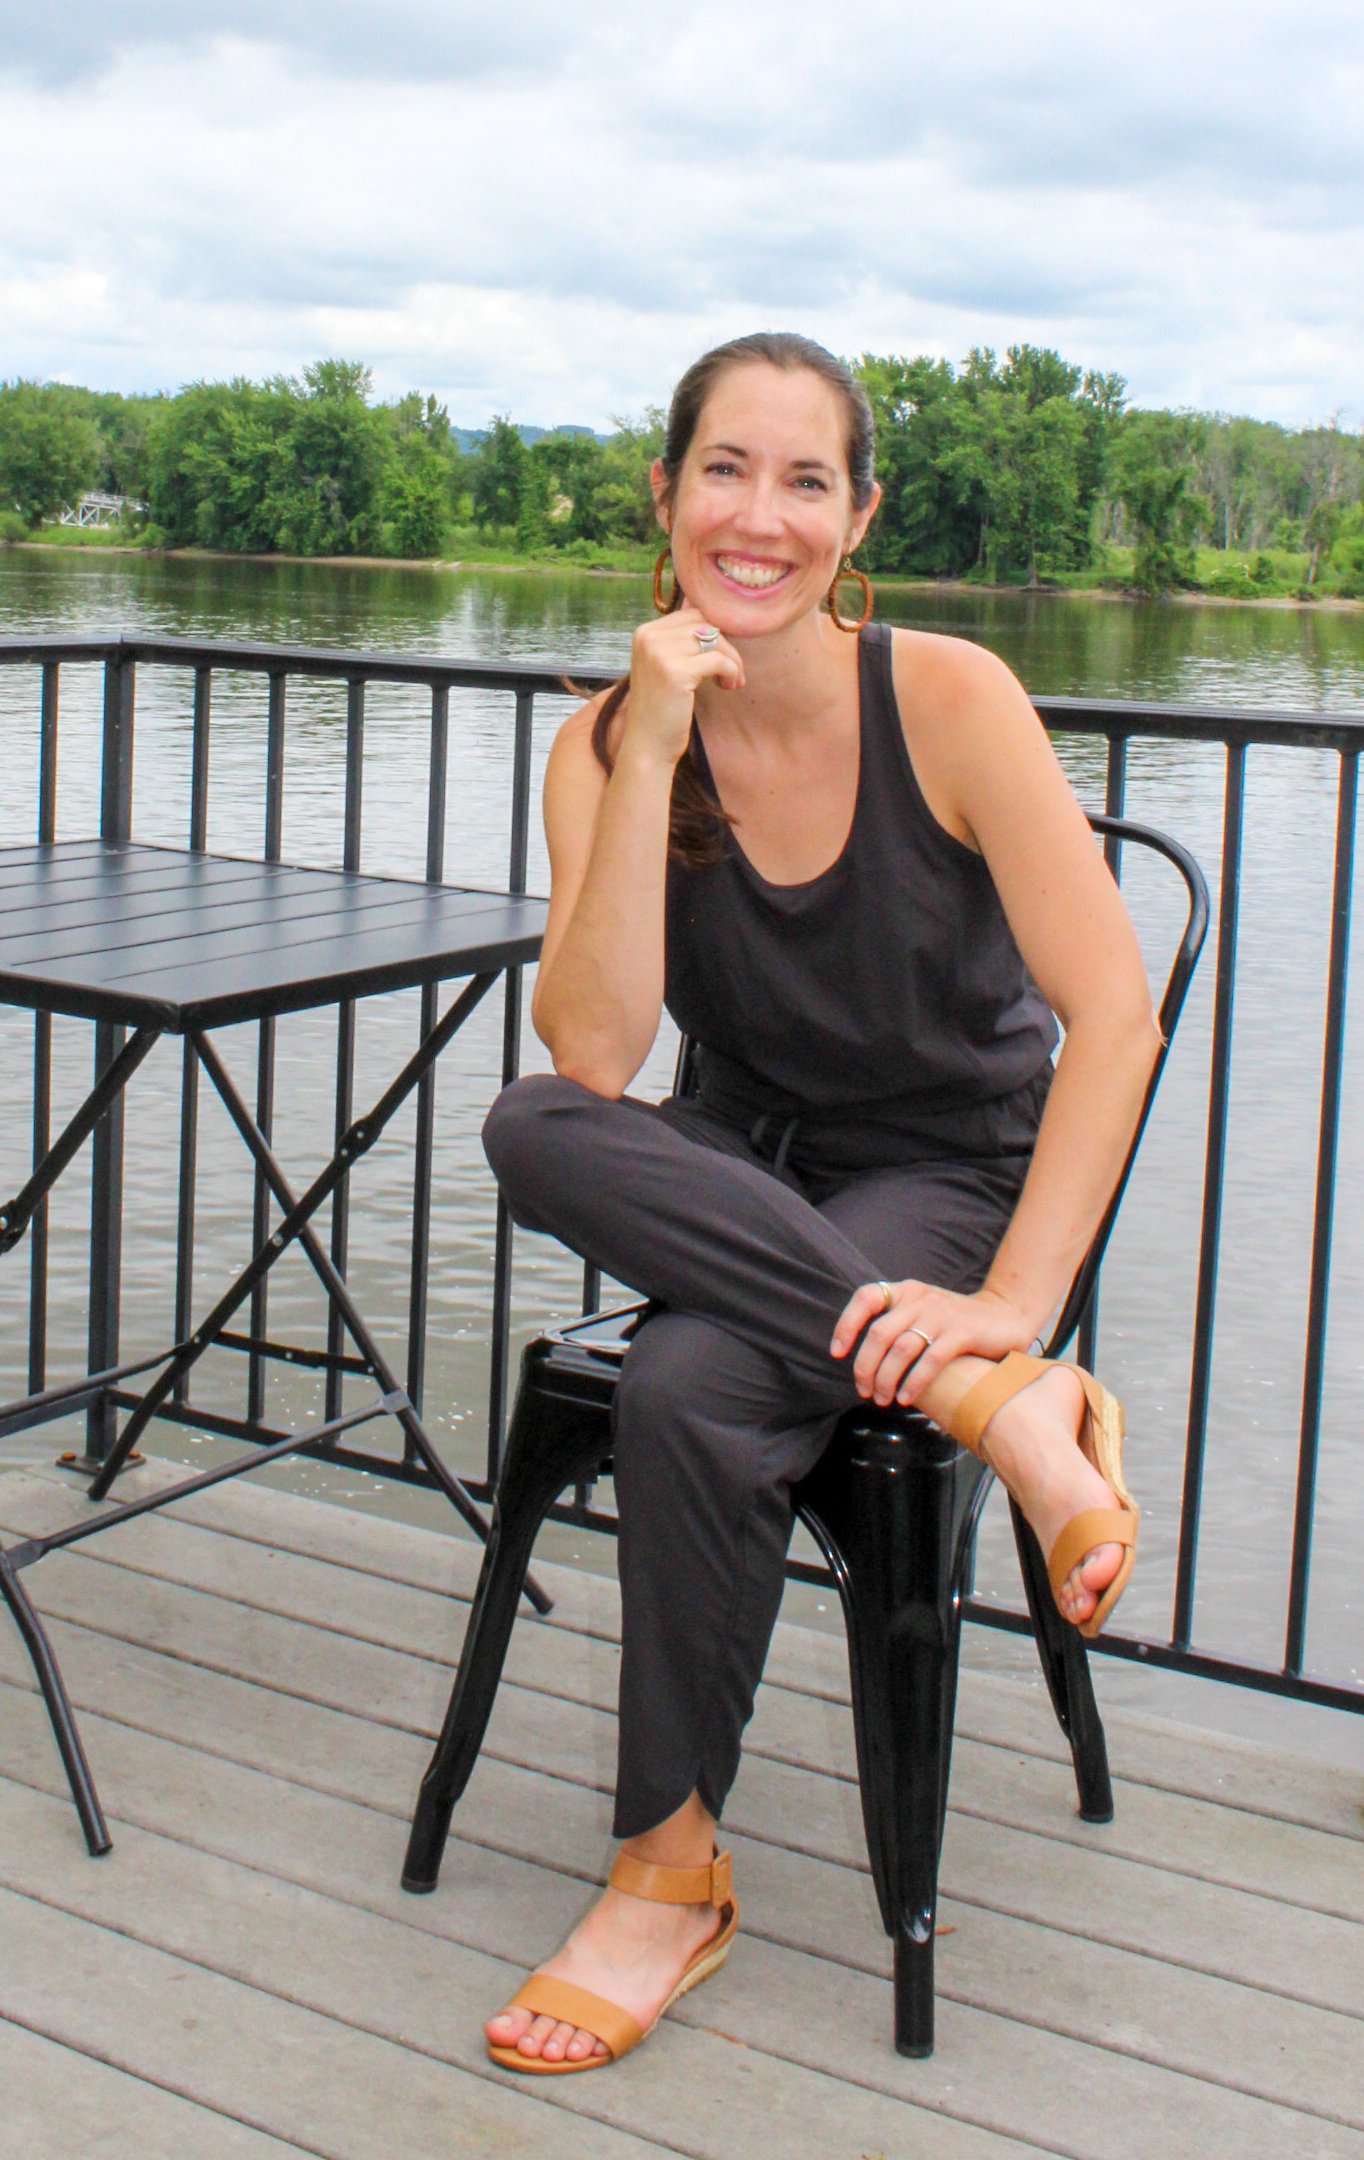  Posed photo of a female life coach with the mississippi river in the background in Lansing, Iowa.    